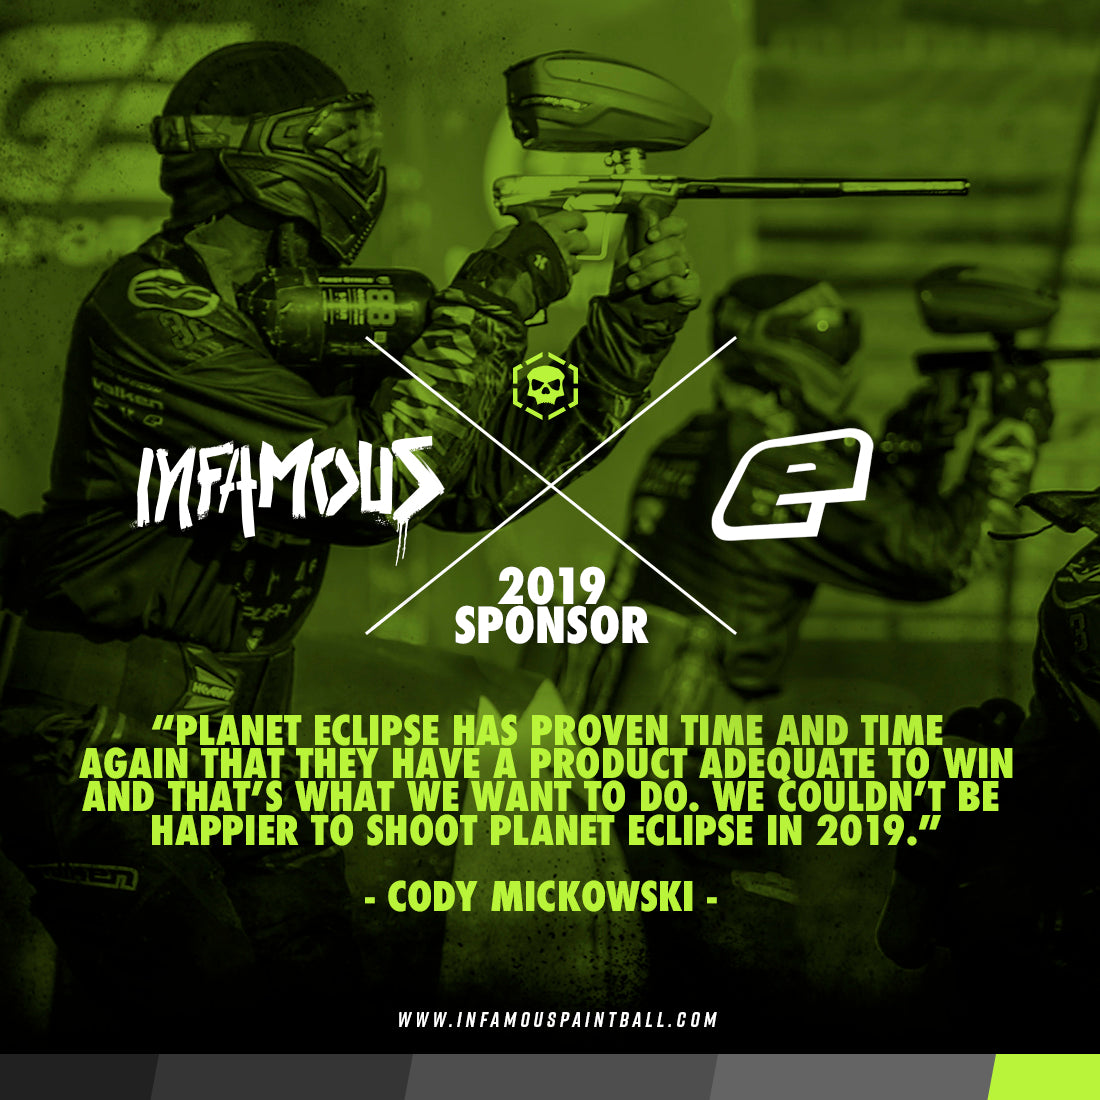 Planet Eclipse Sponsors Infamous in 2019